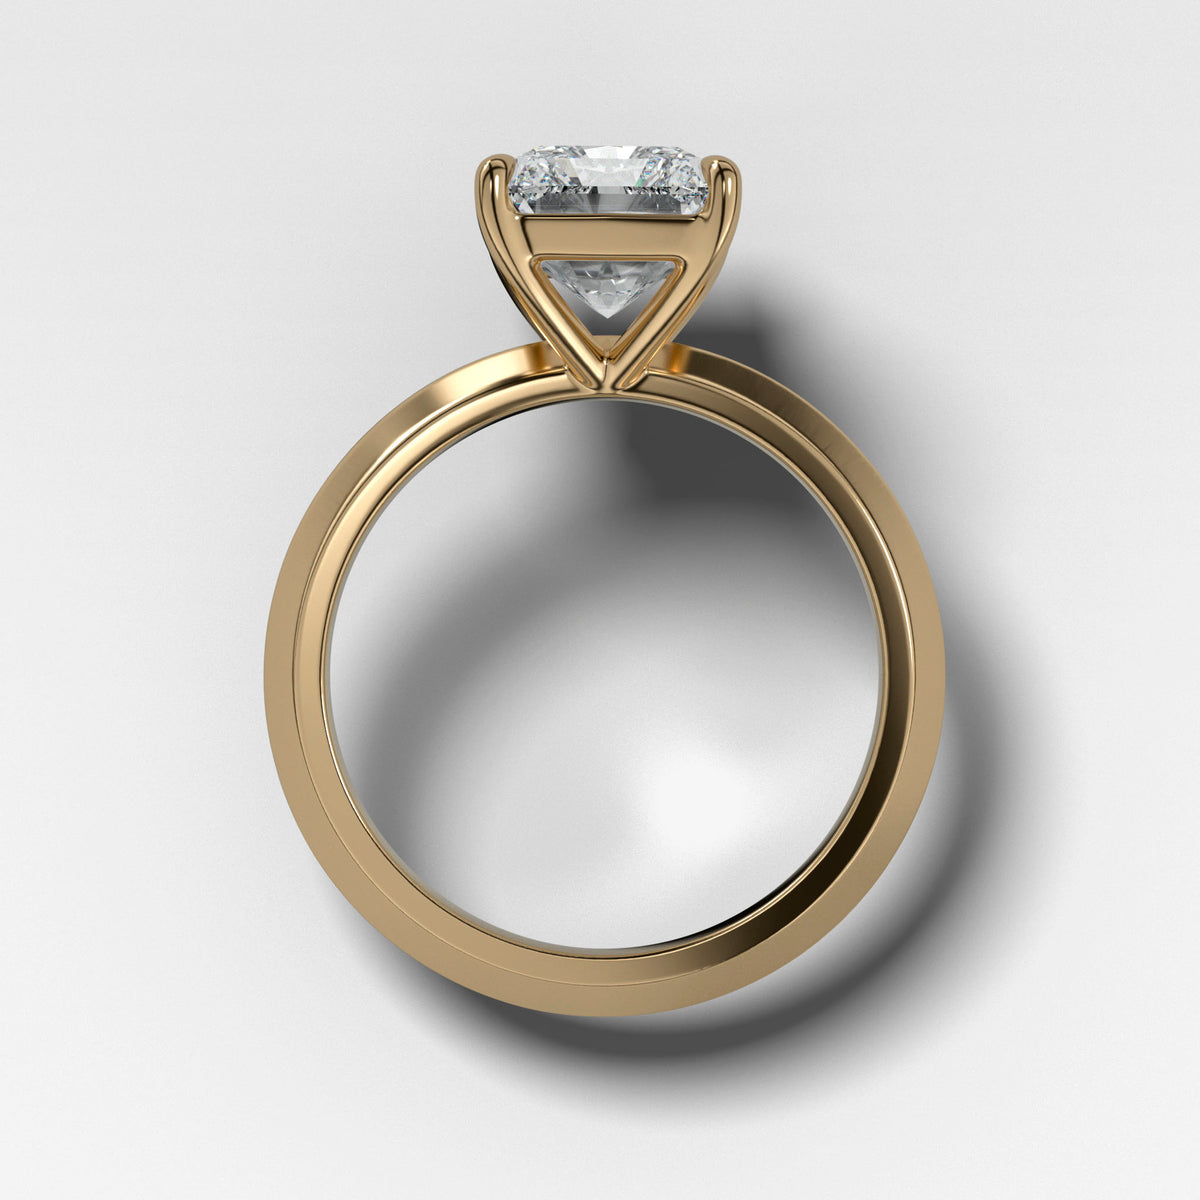 Butter Knife Solitaire Engagement Ring With Elongated Radiant Cut Diamond